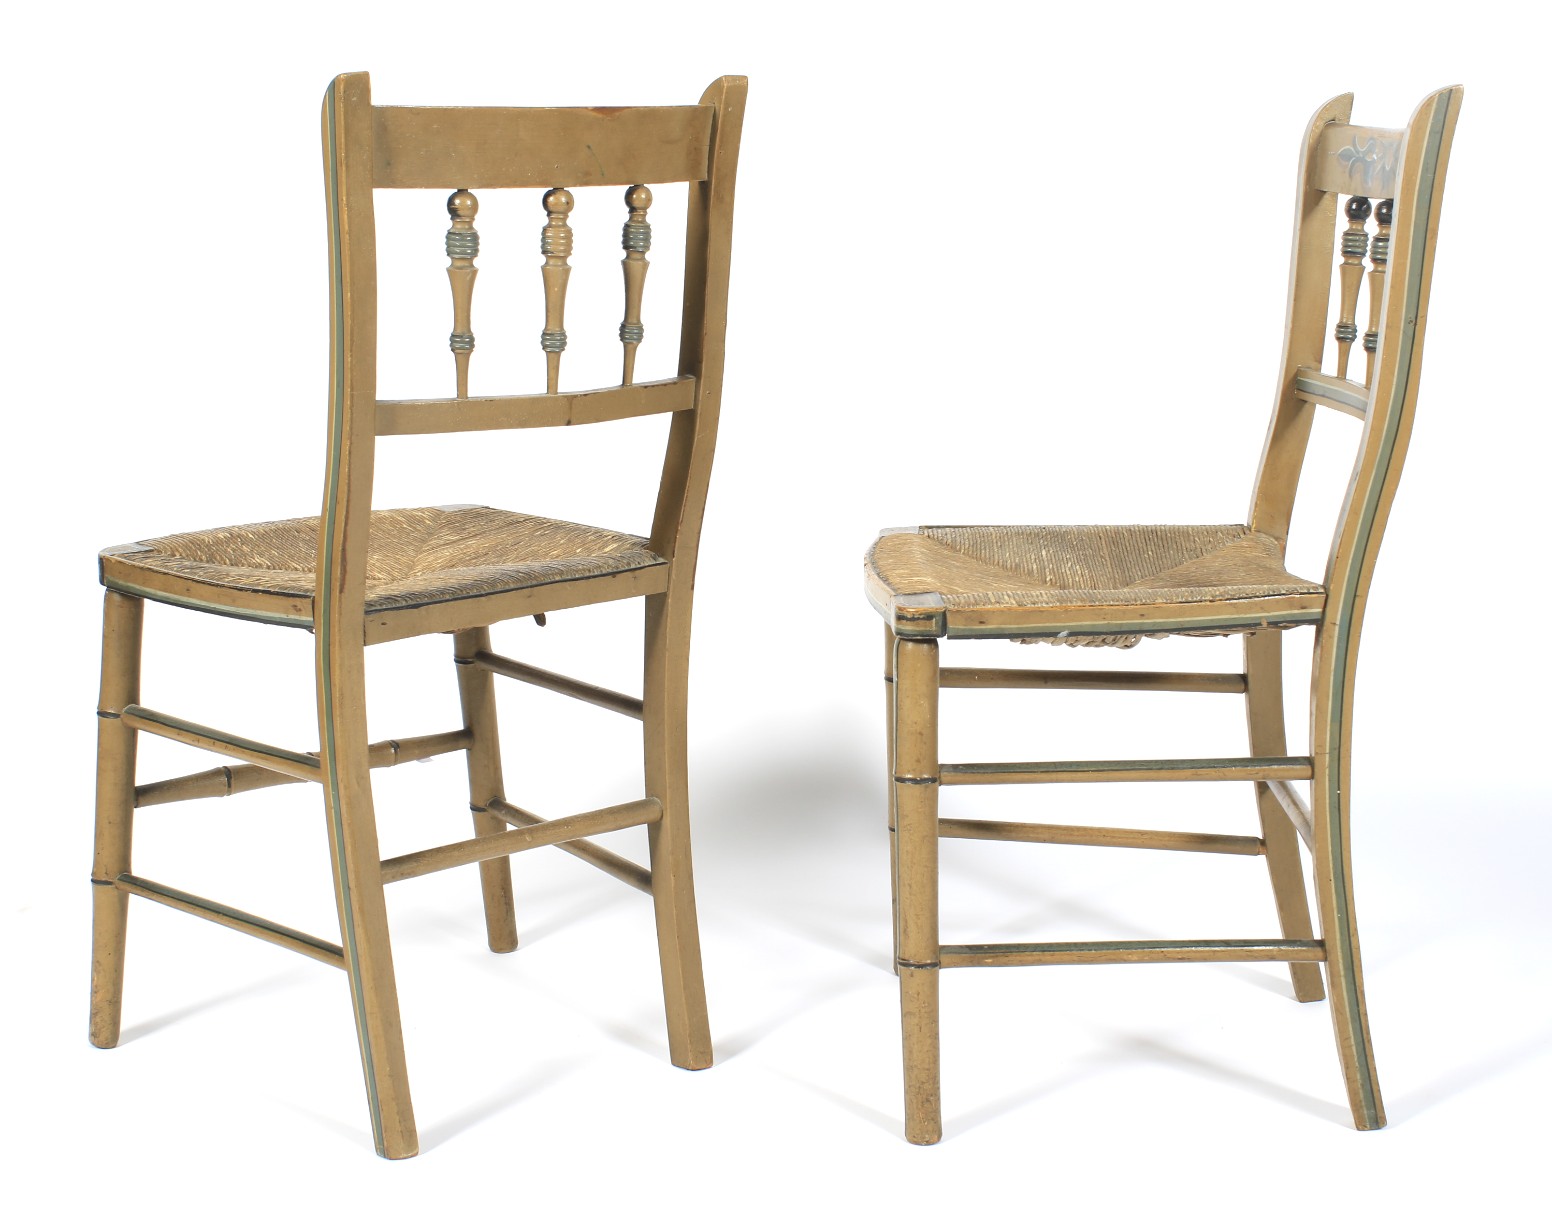 Pair of 19th century beech framed rush seat dining chairs. - Image 2 of 2